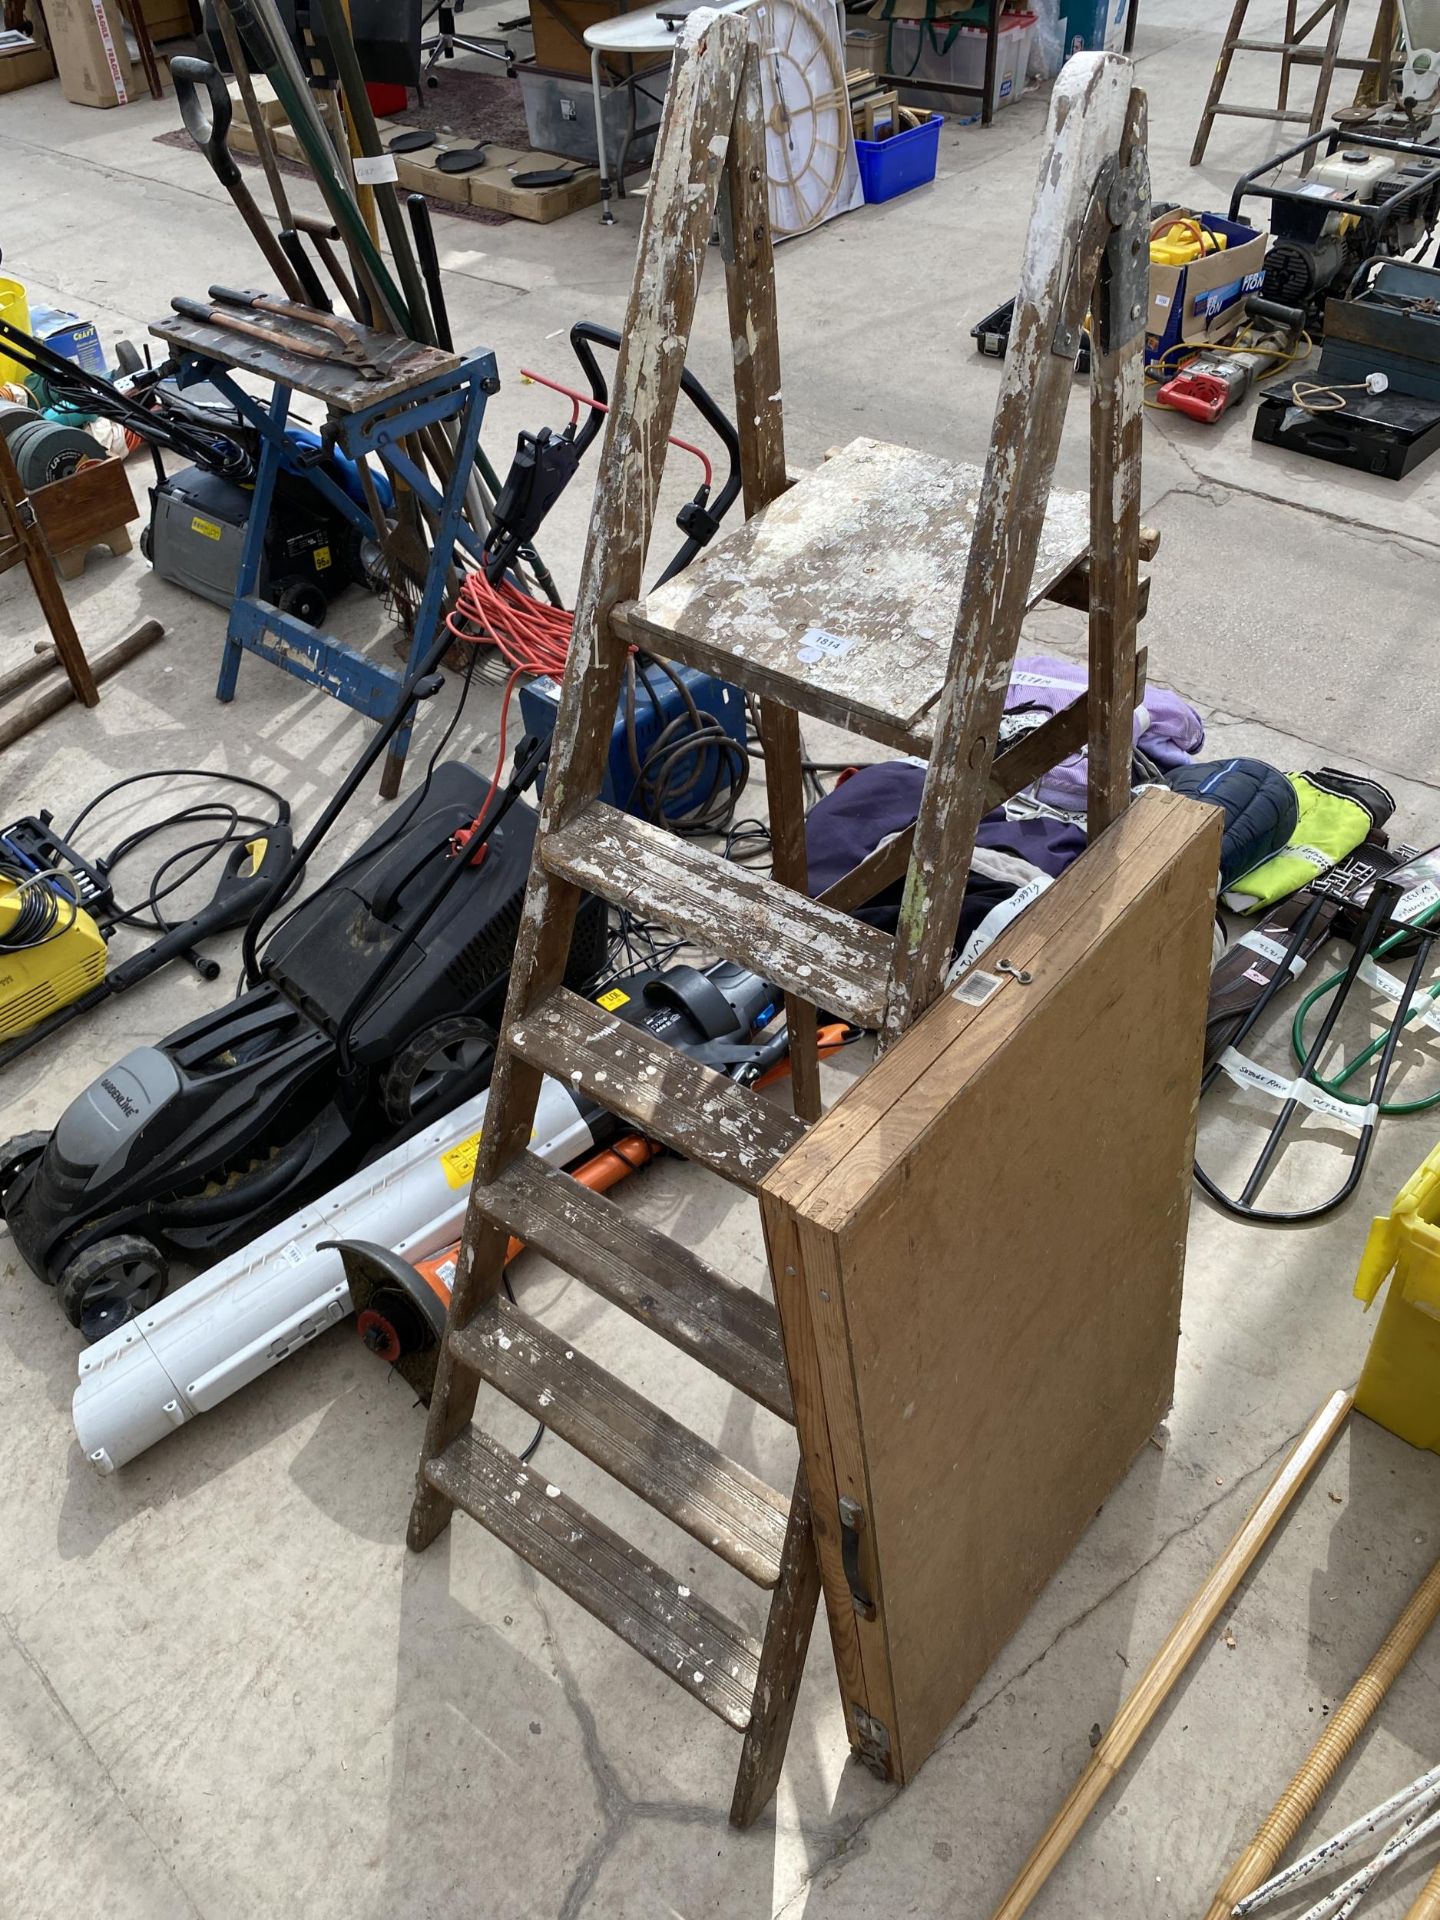 A SET OF STEP LADDERS AND PASTE TABLE